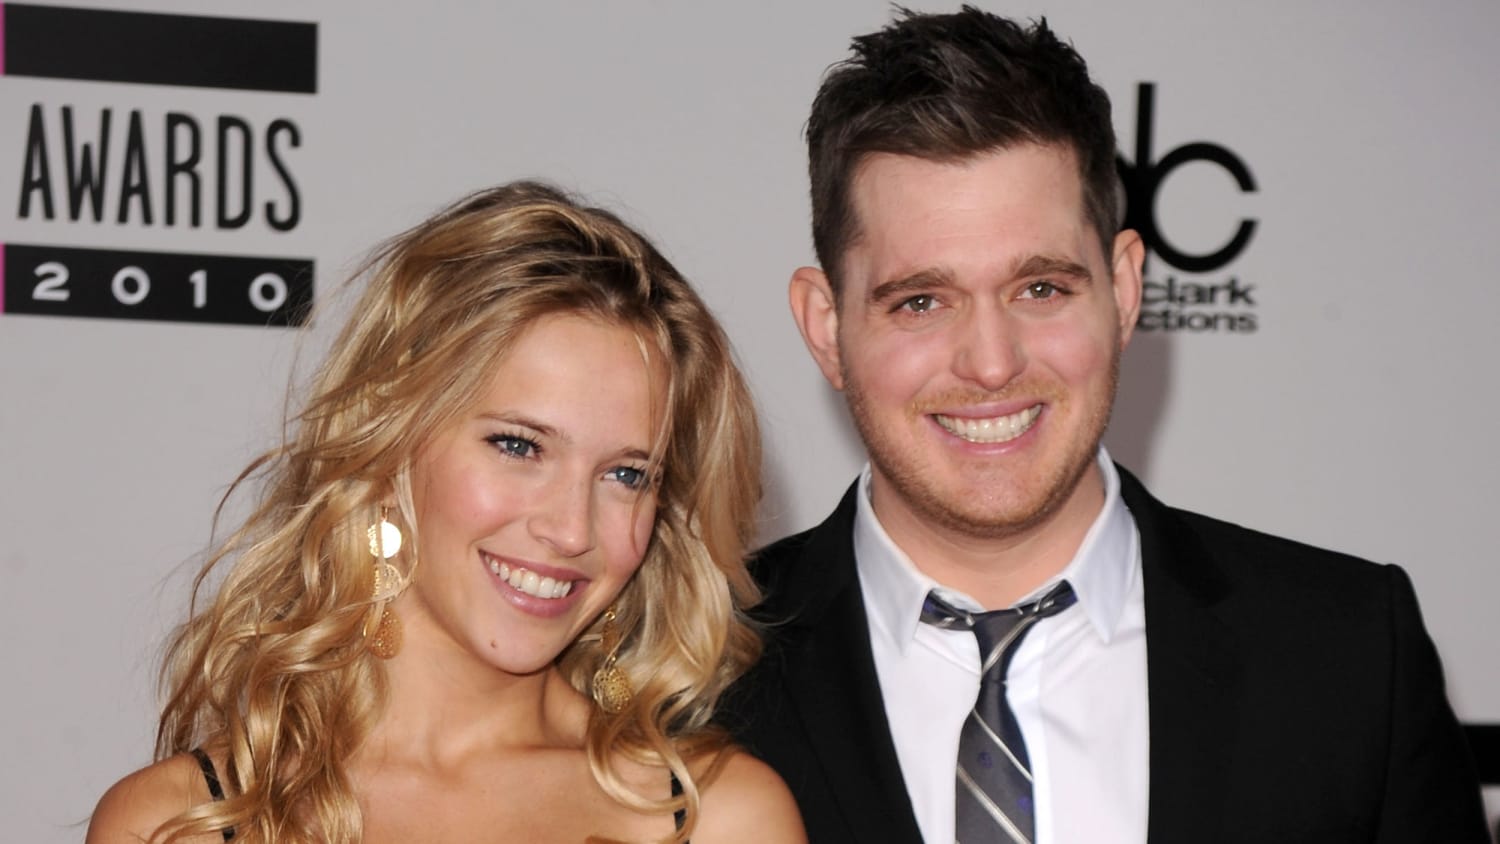 Michael Bublé and Luisana Lopilato announce baby No. 2 - TODAY.com2500 x 1407